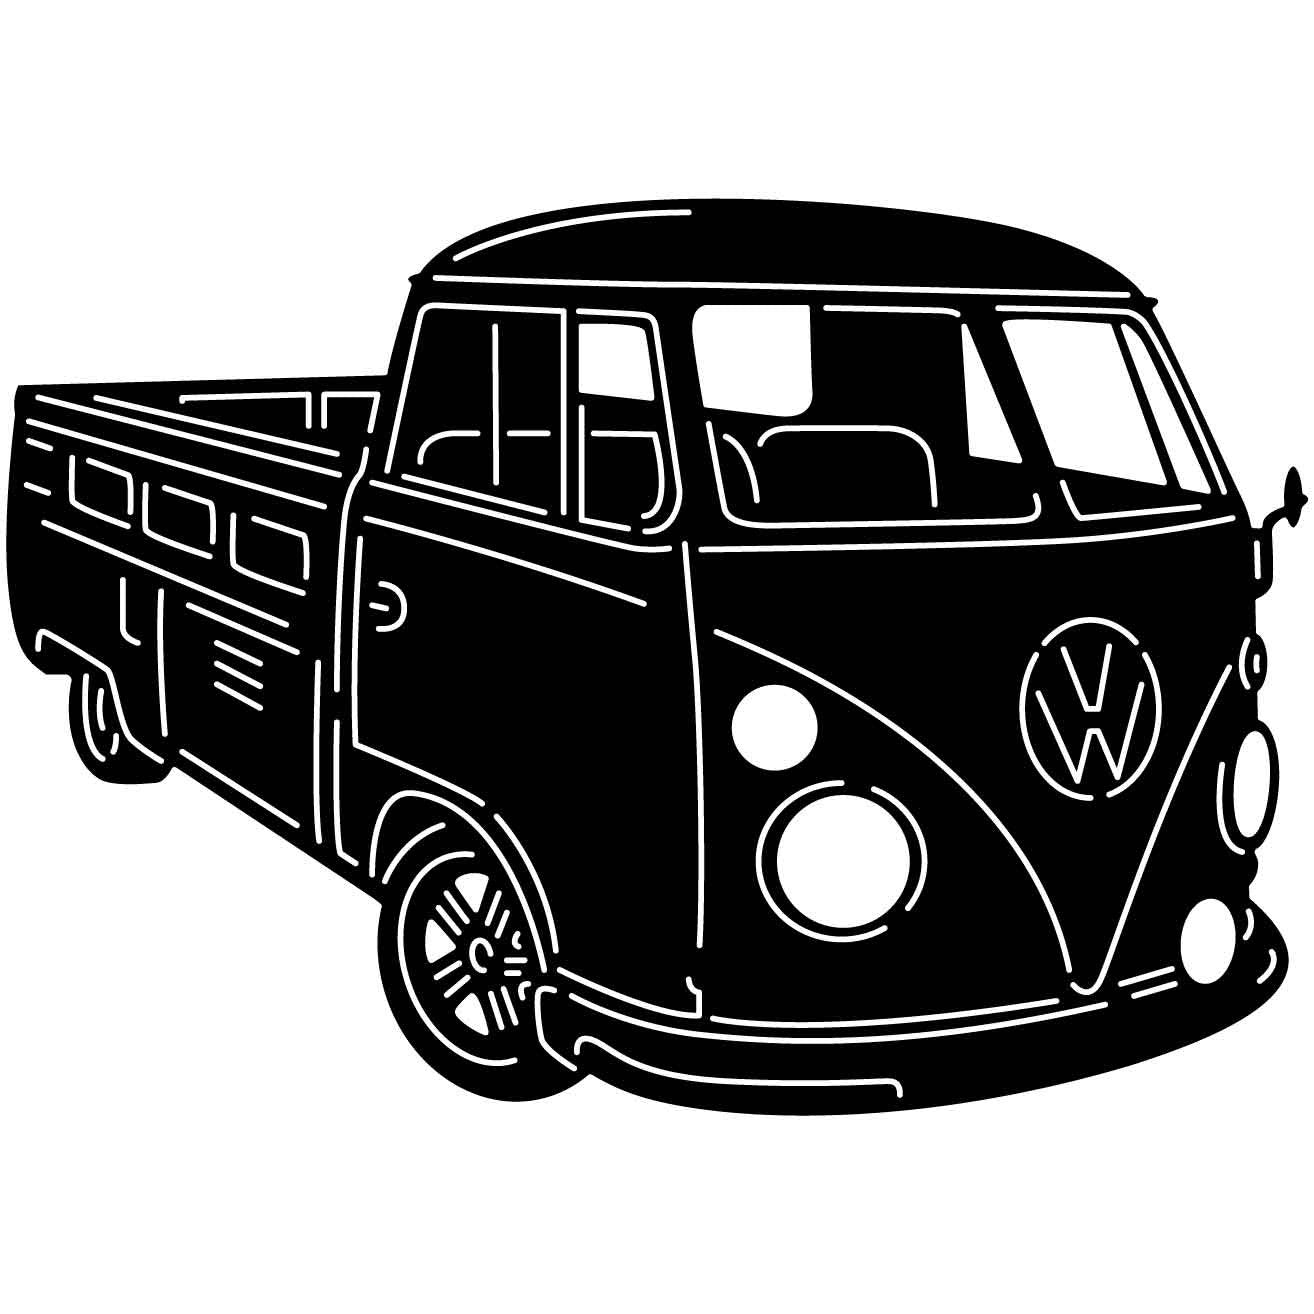 VW Combi 02 DXF File Cut Ready for CNC